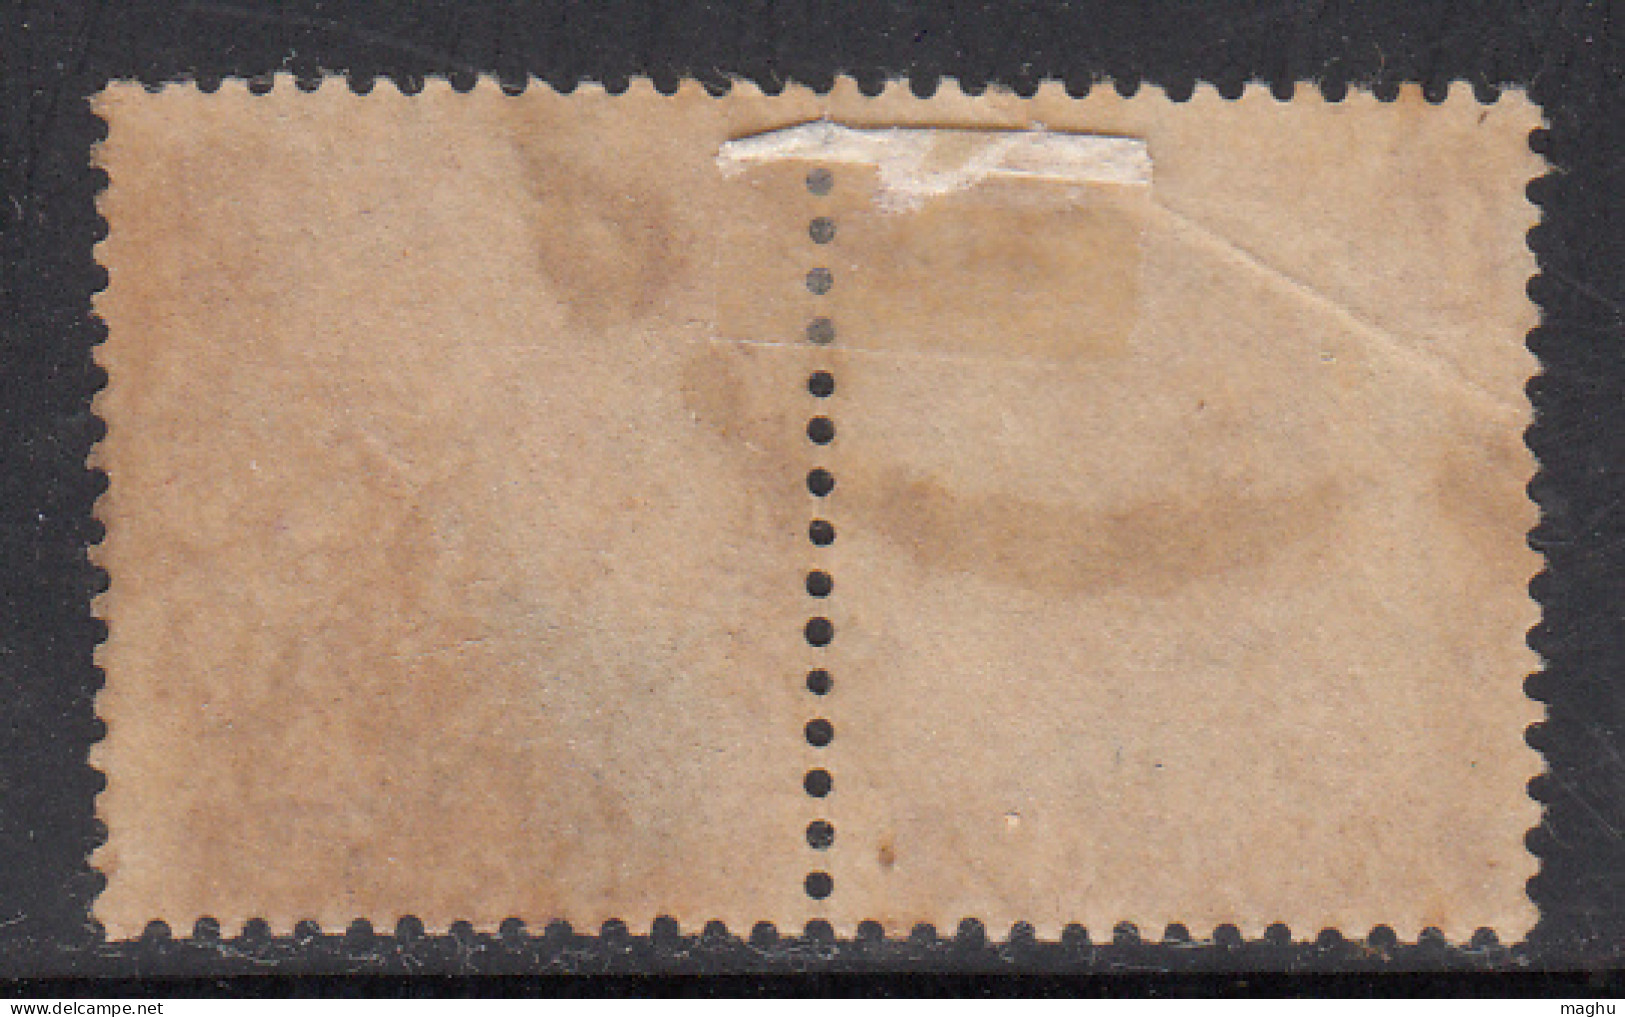 1a Used Pair Jind State 1940-1943, KGVI Series, British India, SG140 £1.50 - Jhind